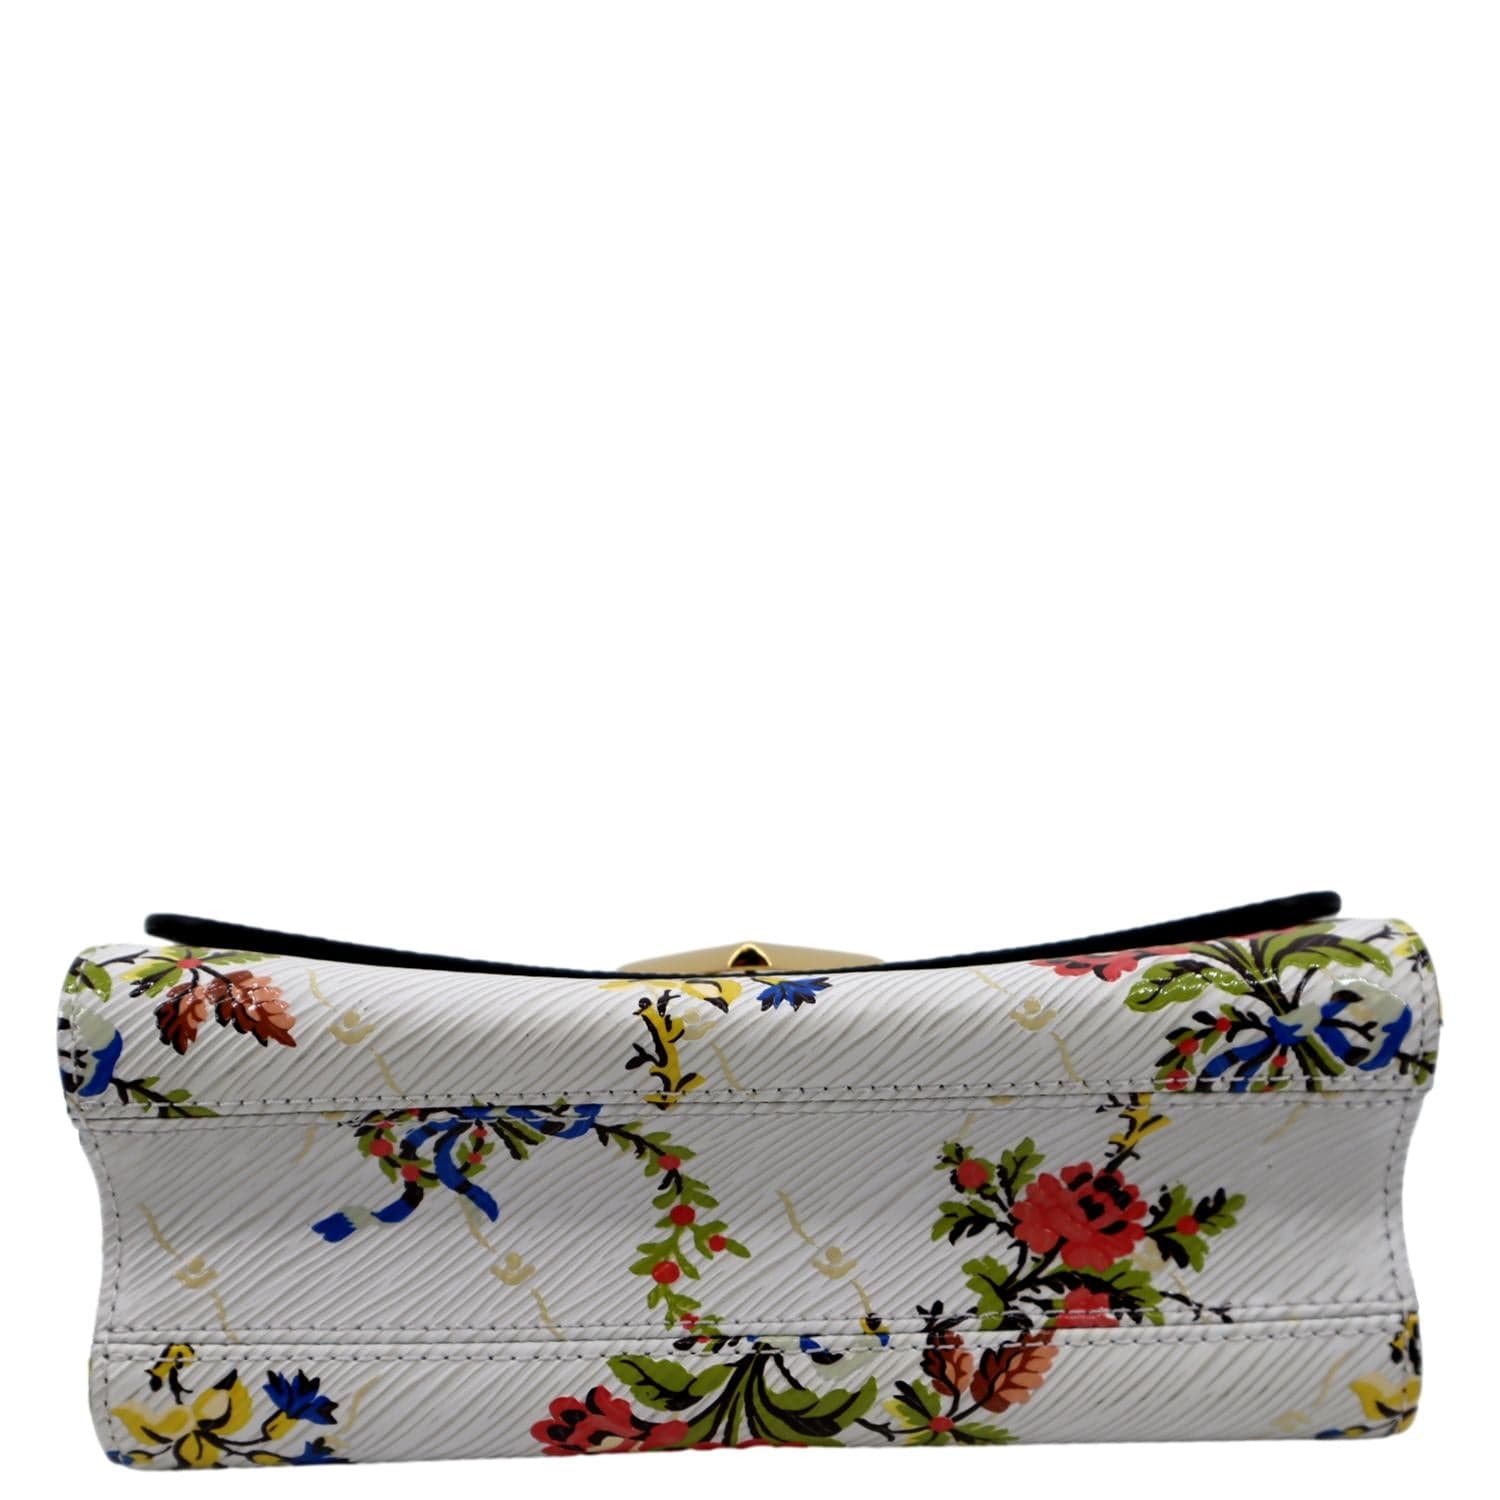 Givenchy Black/Multicolor Floral Printed Leather Buckle Clutch Bag